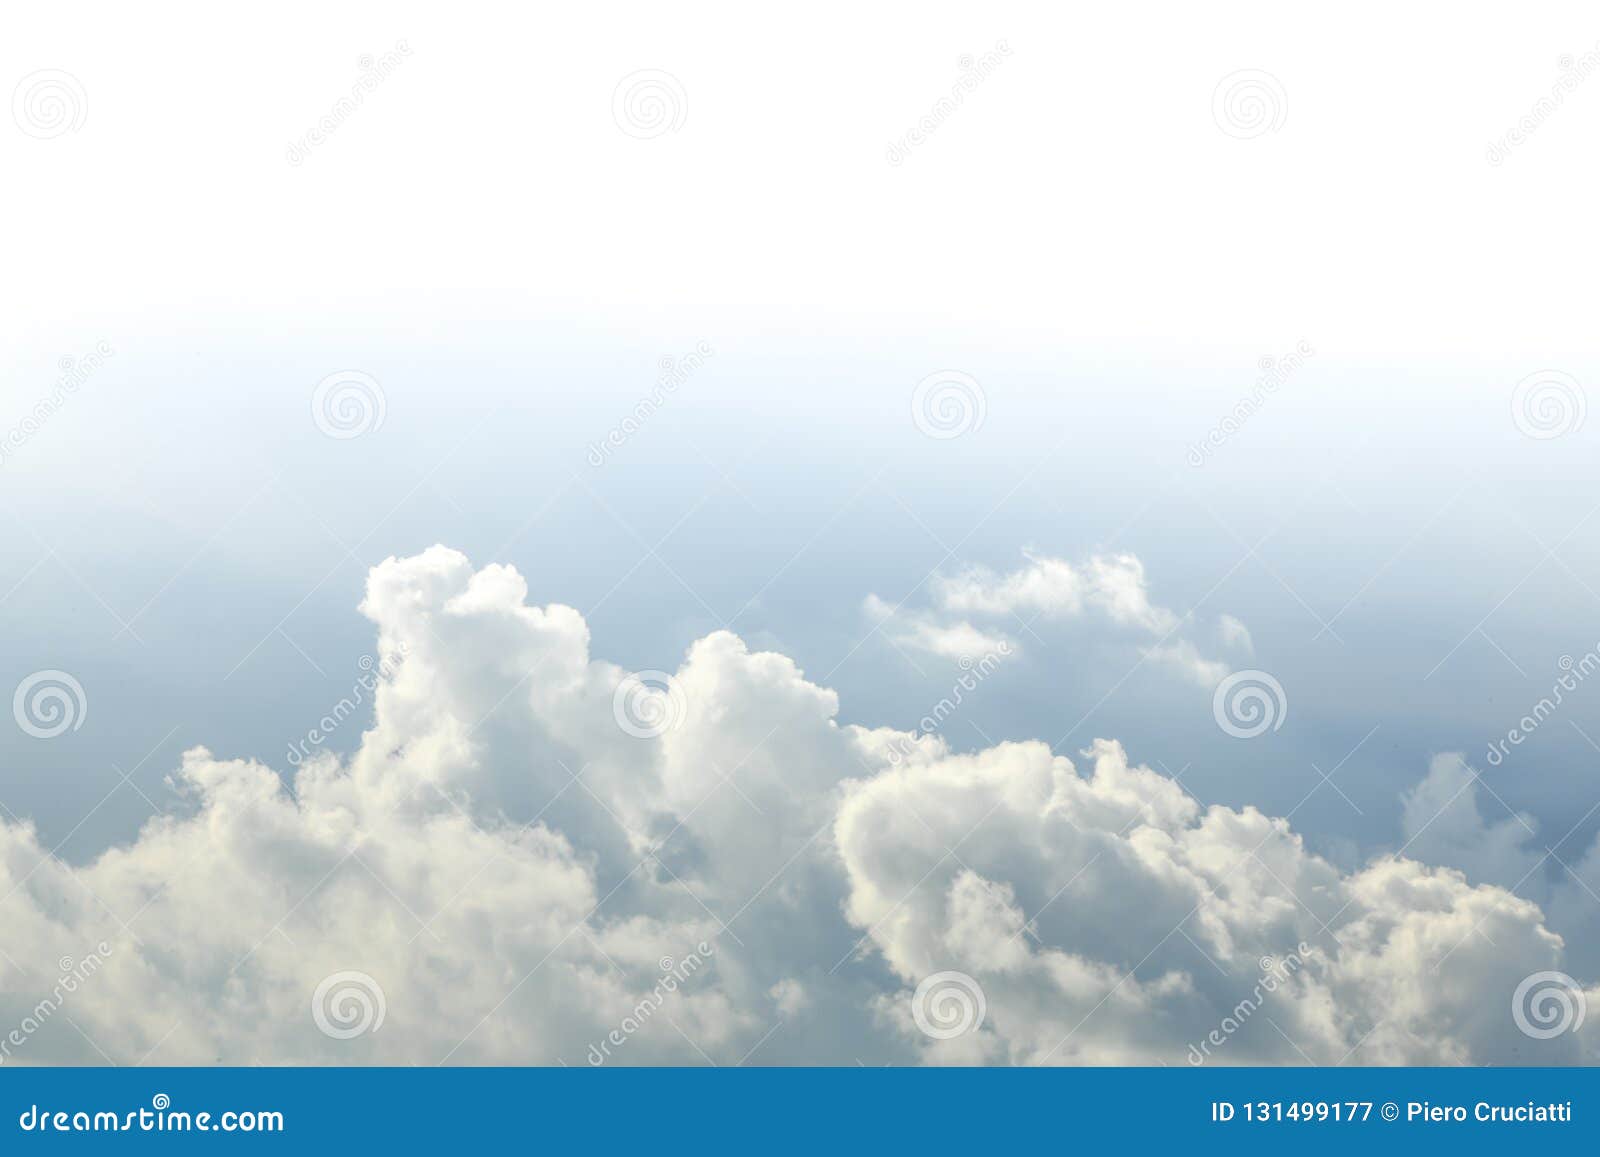 beautiful tranquil and serene sky with fluffy clouds. background with white copy space